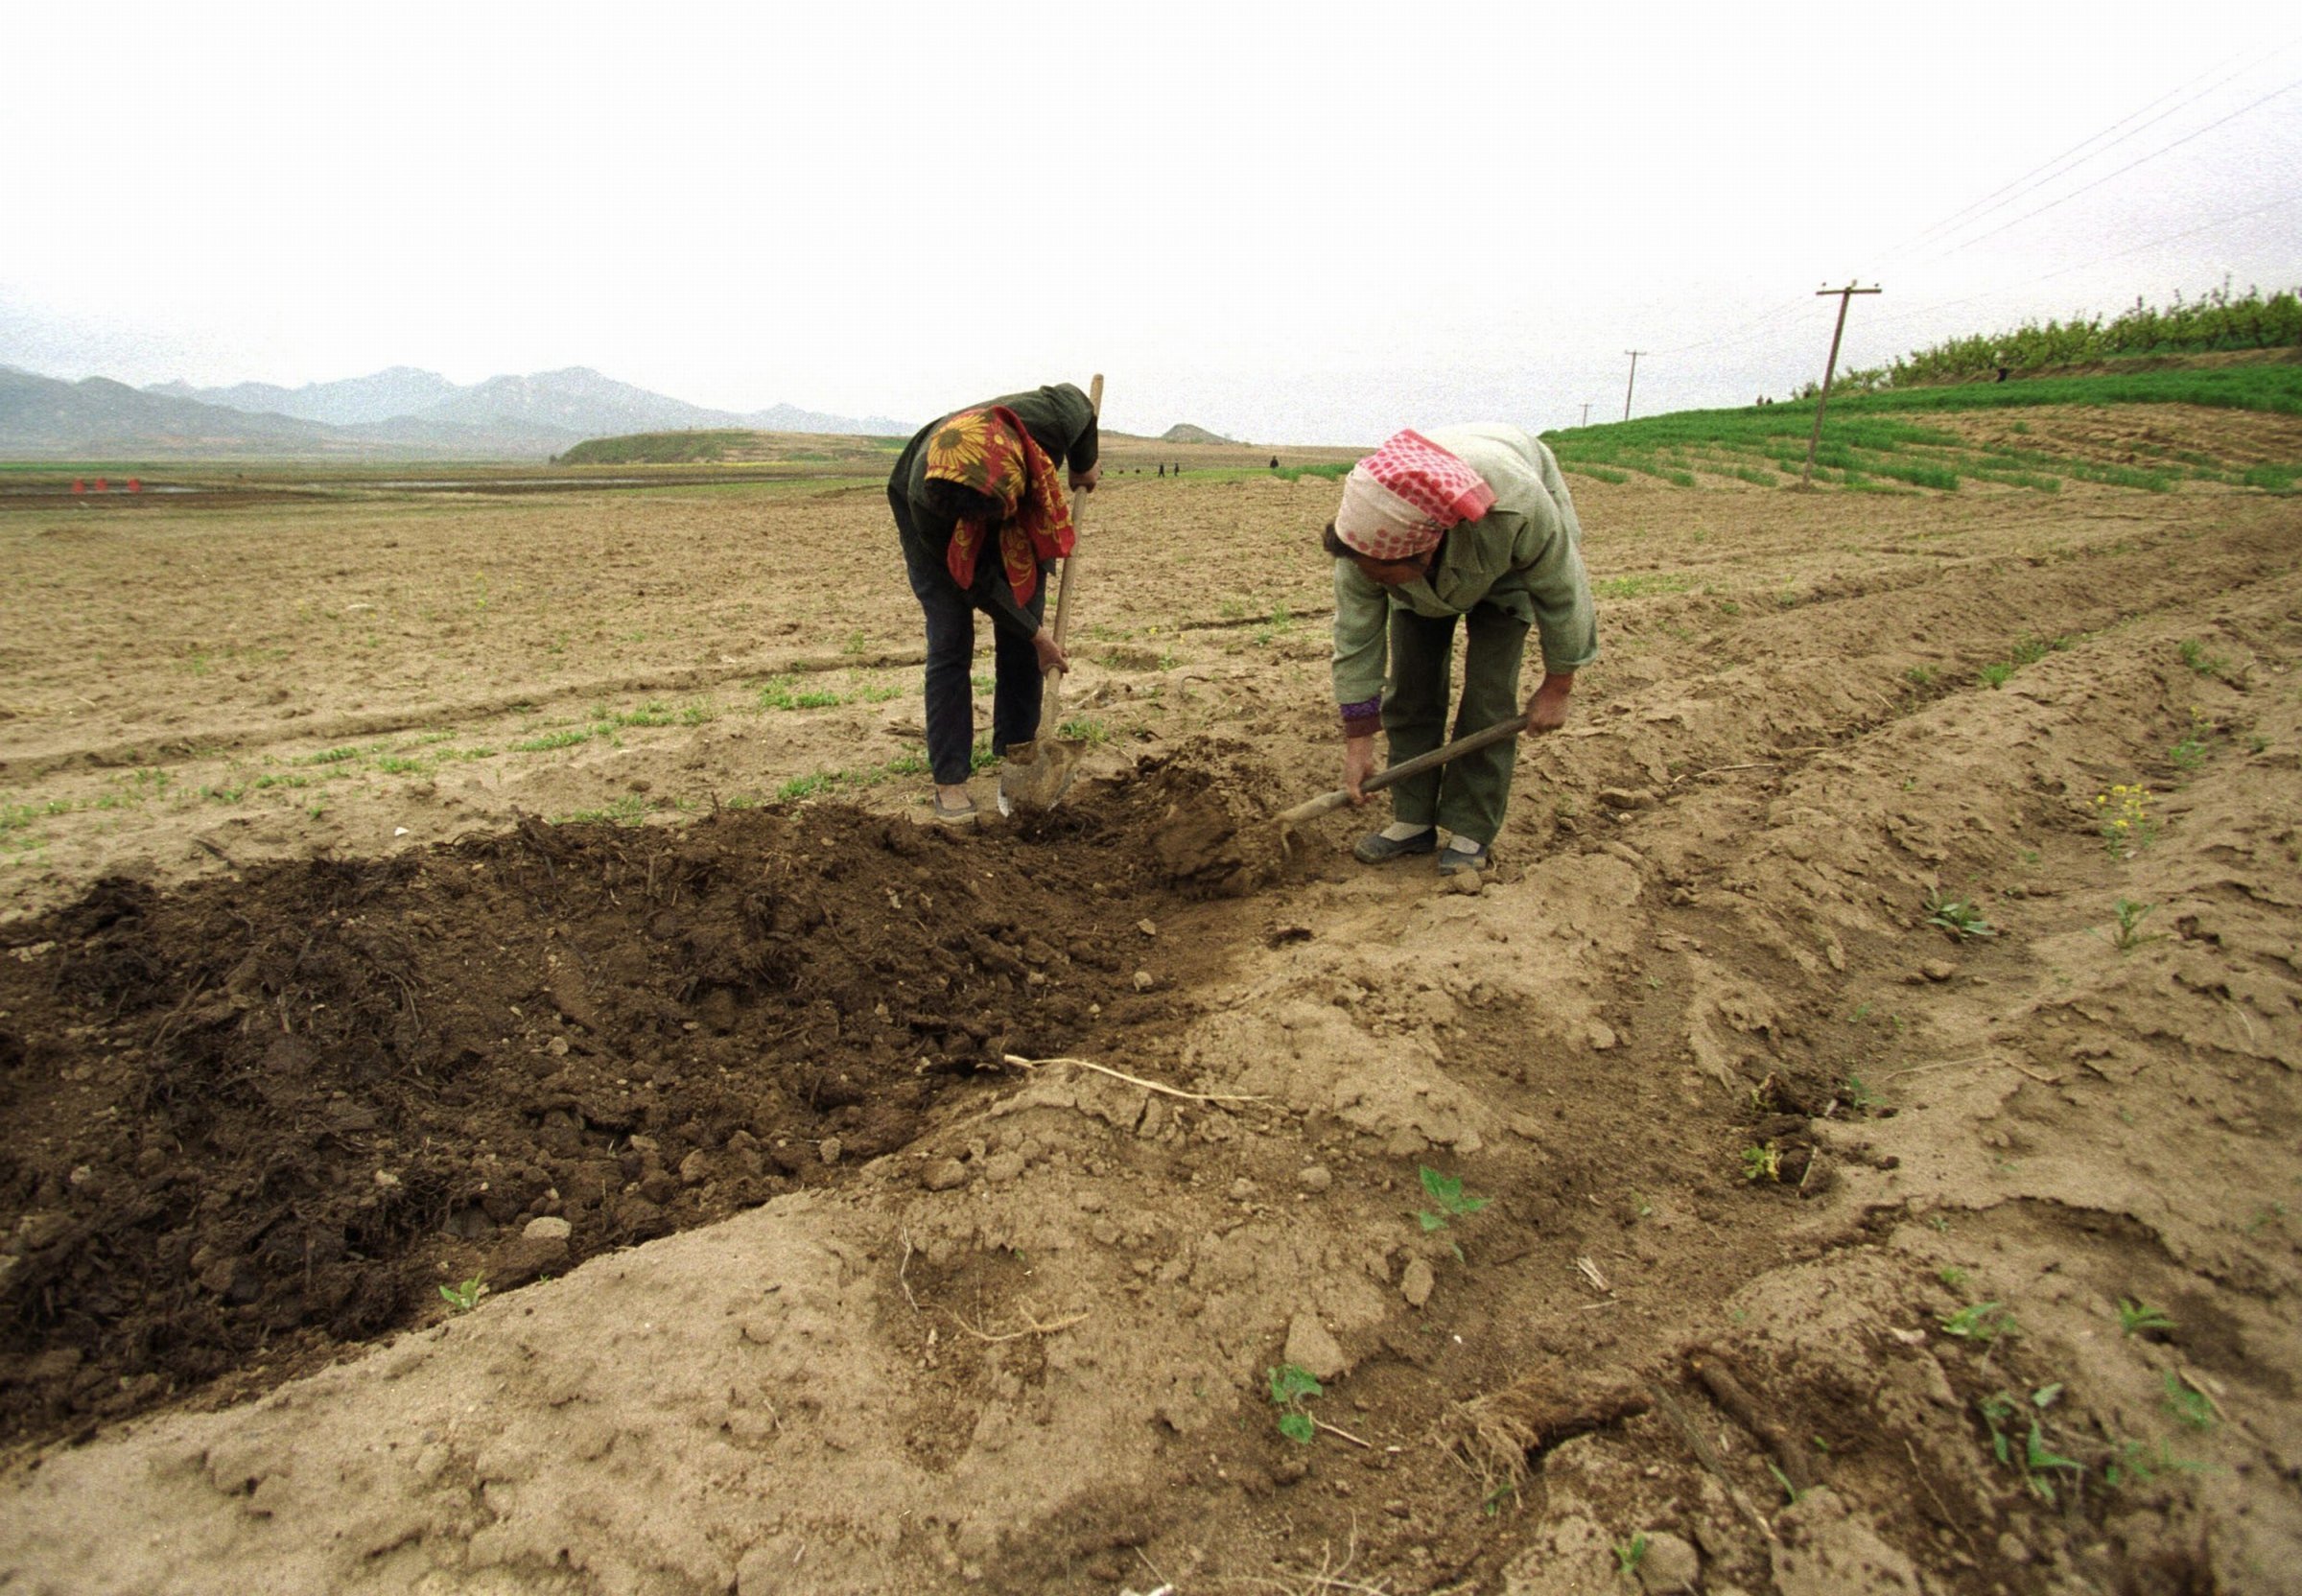 Woman farmers working in the fields in North Korea in this undated photograph.